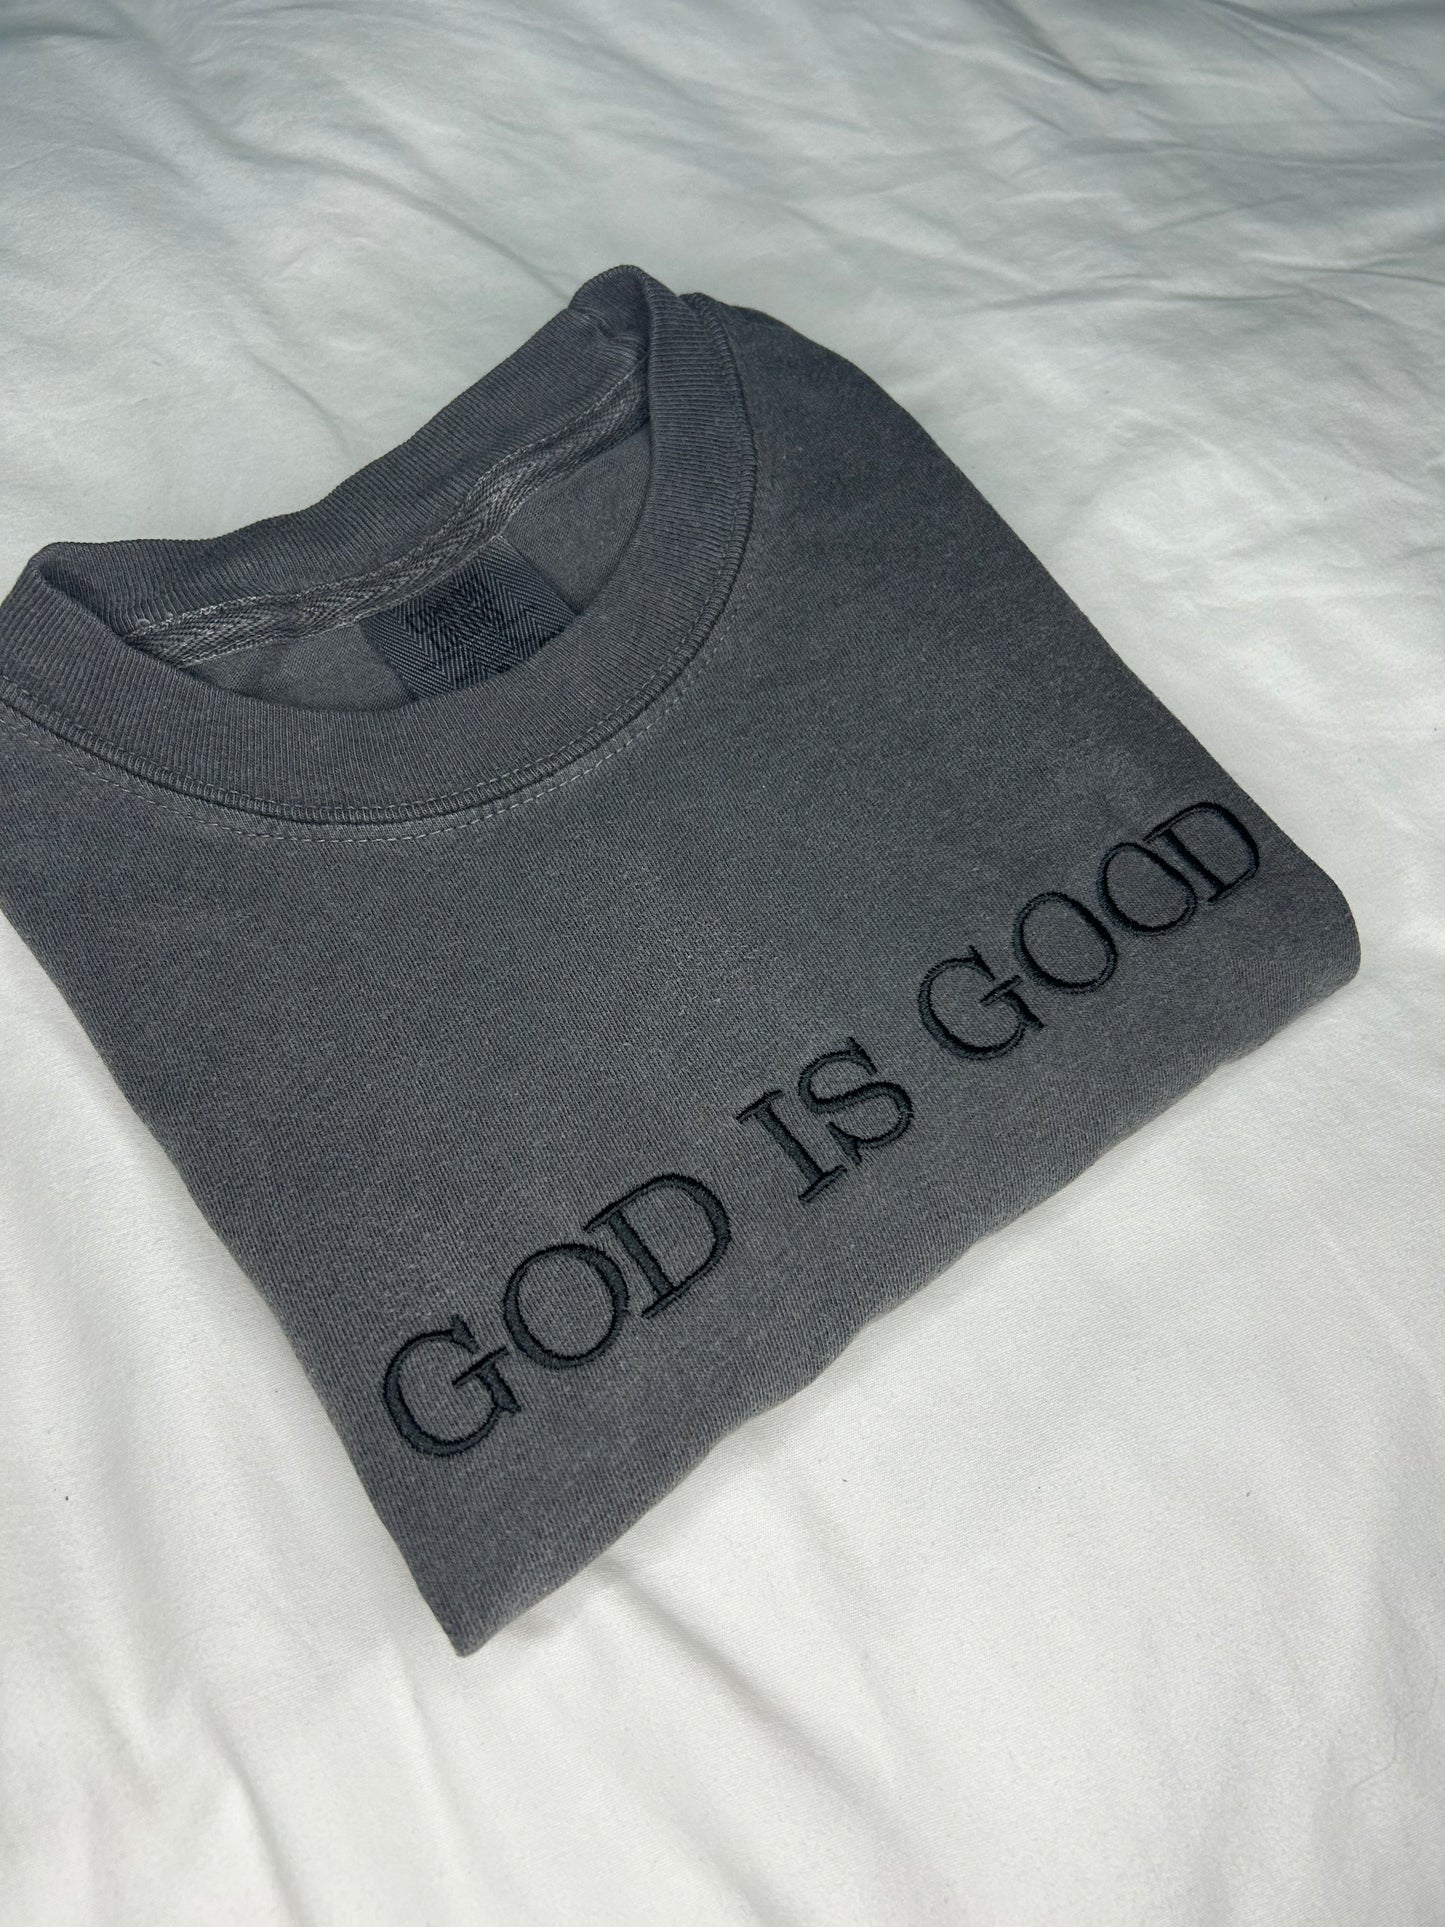 Embroidered God is Good Comfort Colors Tshirt